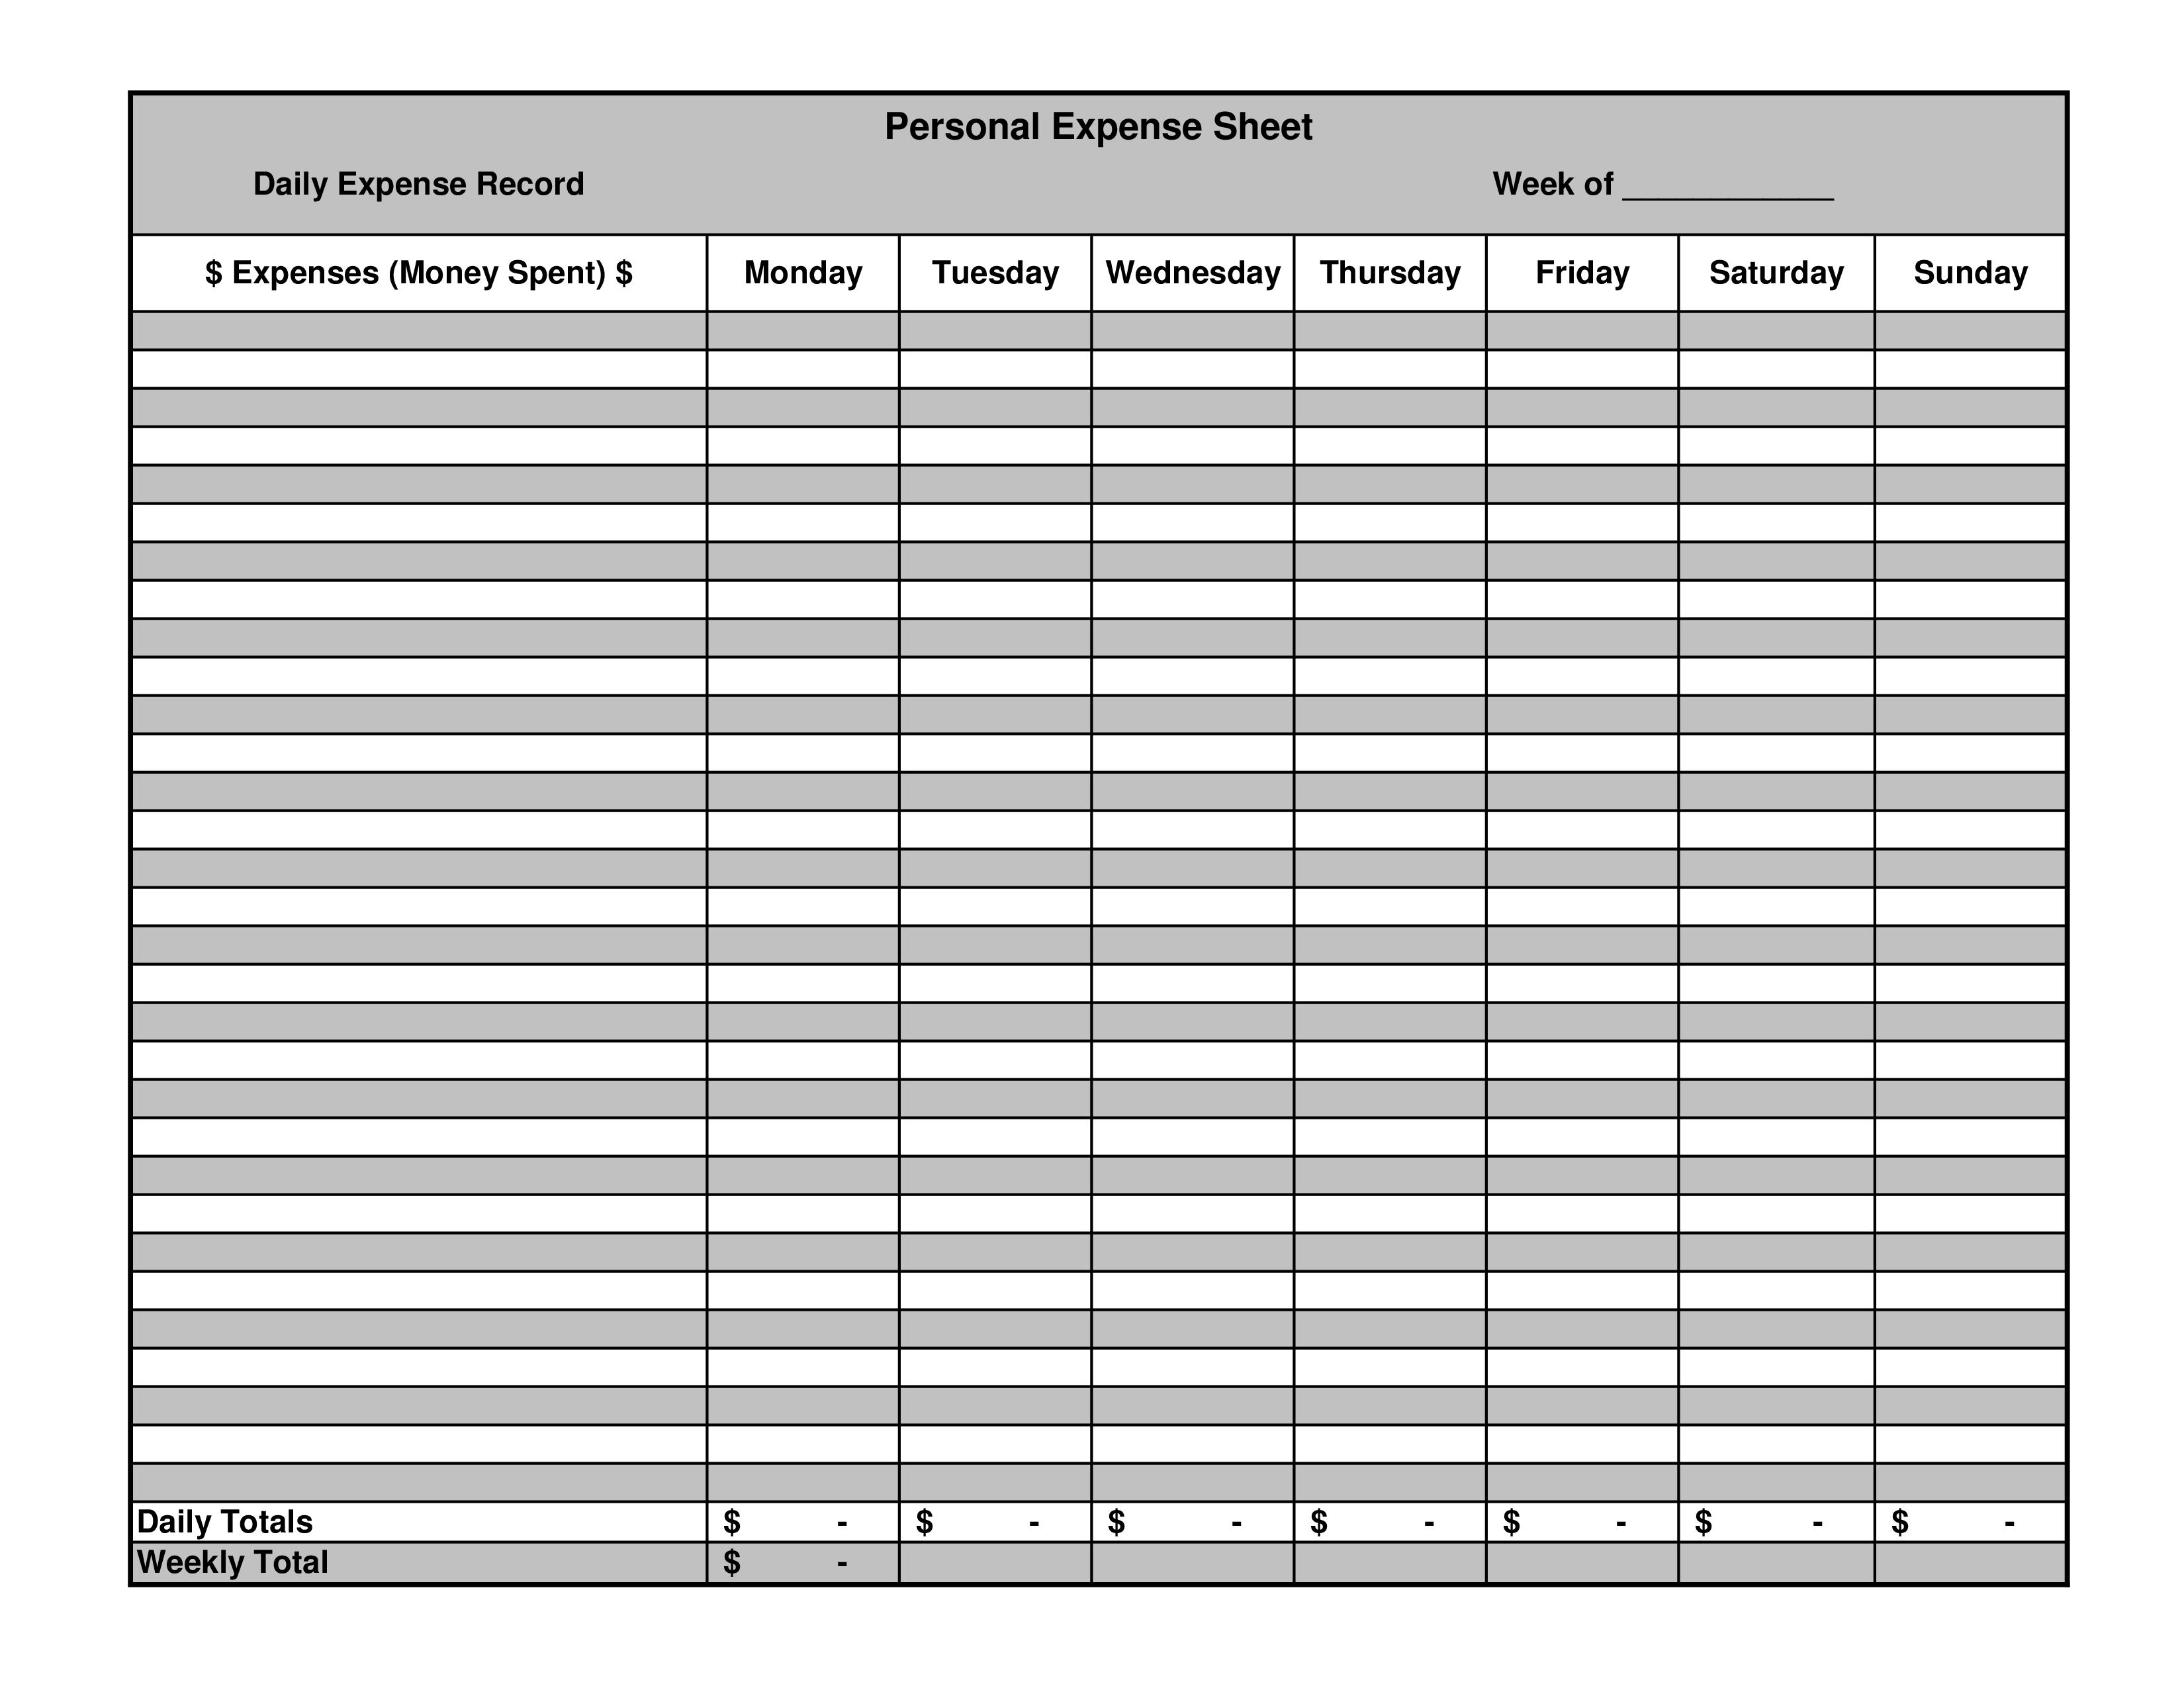 Personal Expense Templates At Allbusinesstemplates